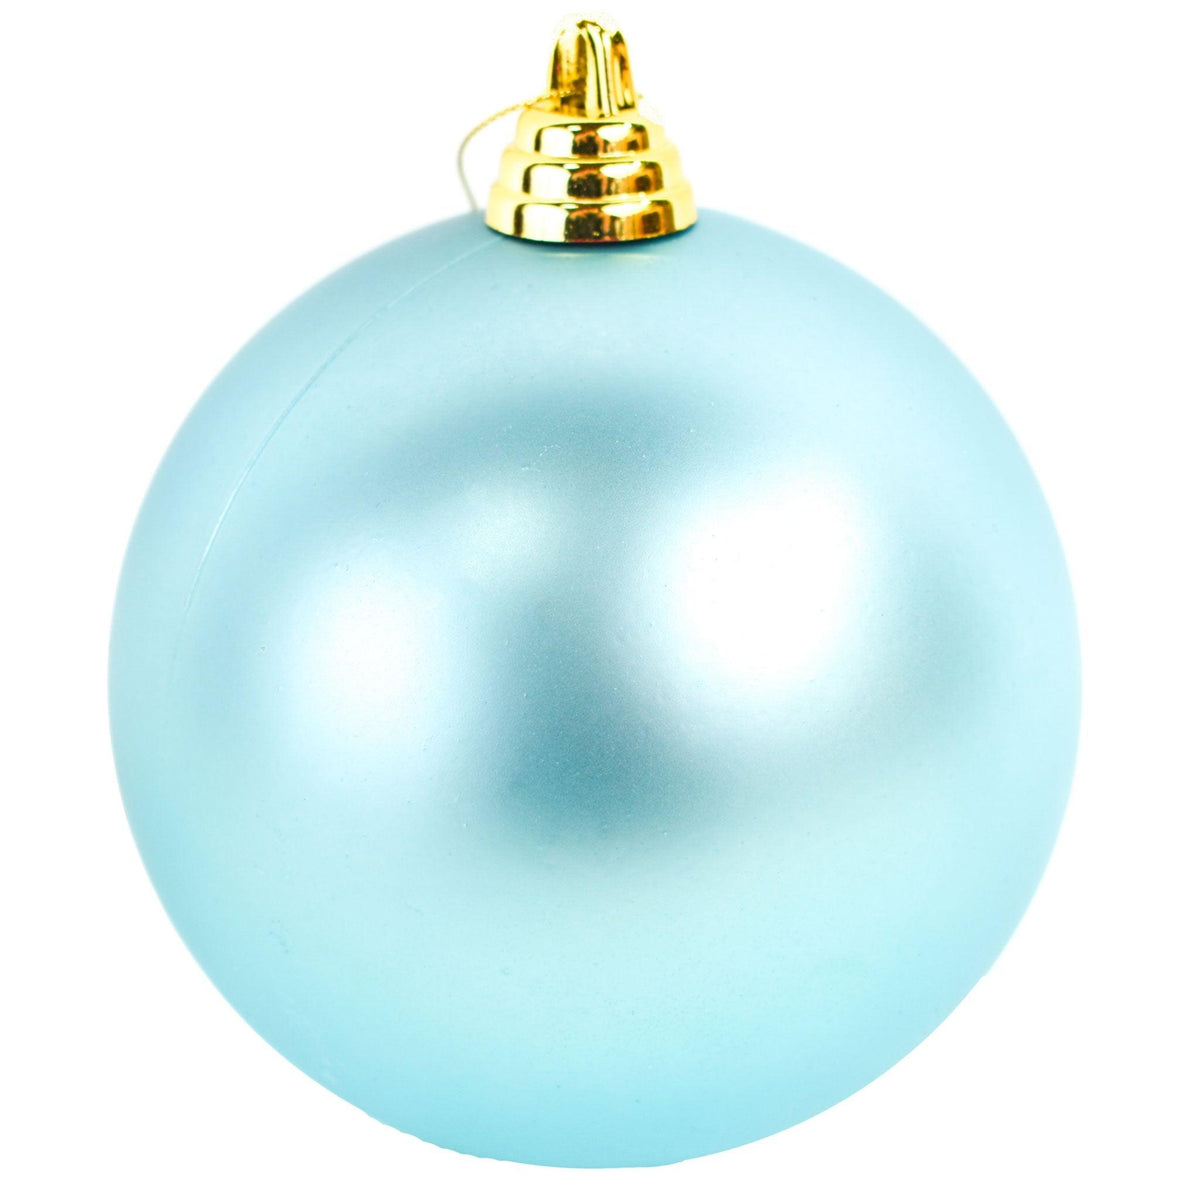 Lee Display offers brand new Shiny Matte Teal Plastic Ball Ornaments at wholesale prices for affordable Christmas Tree Hanging and Holiday Decorating on sale at leedisplay.com